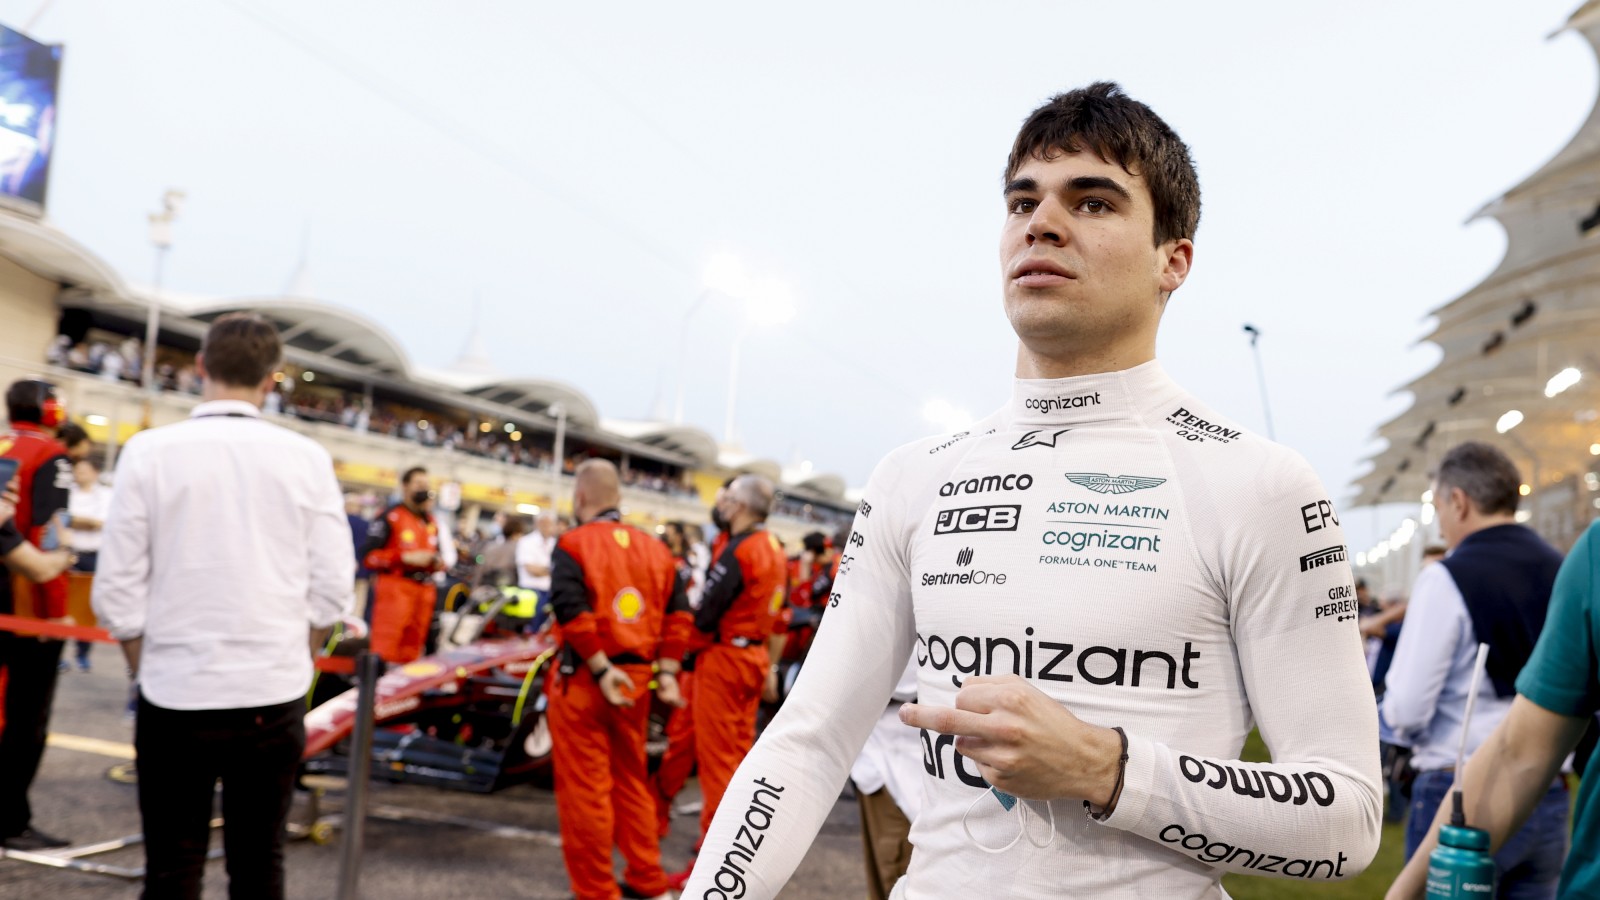 Formula 1: Why does each driver present on the grid have their own penalty points - Check Out